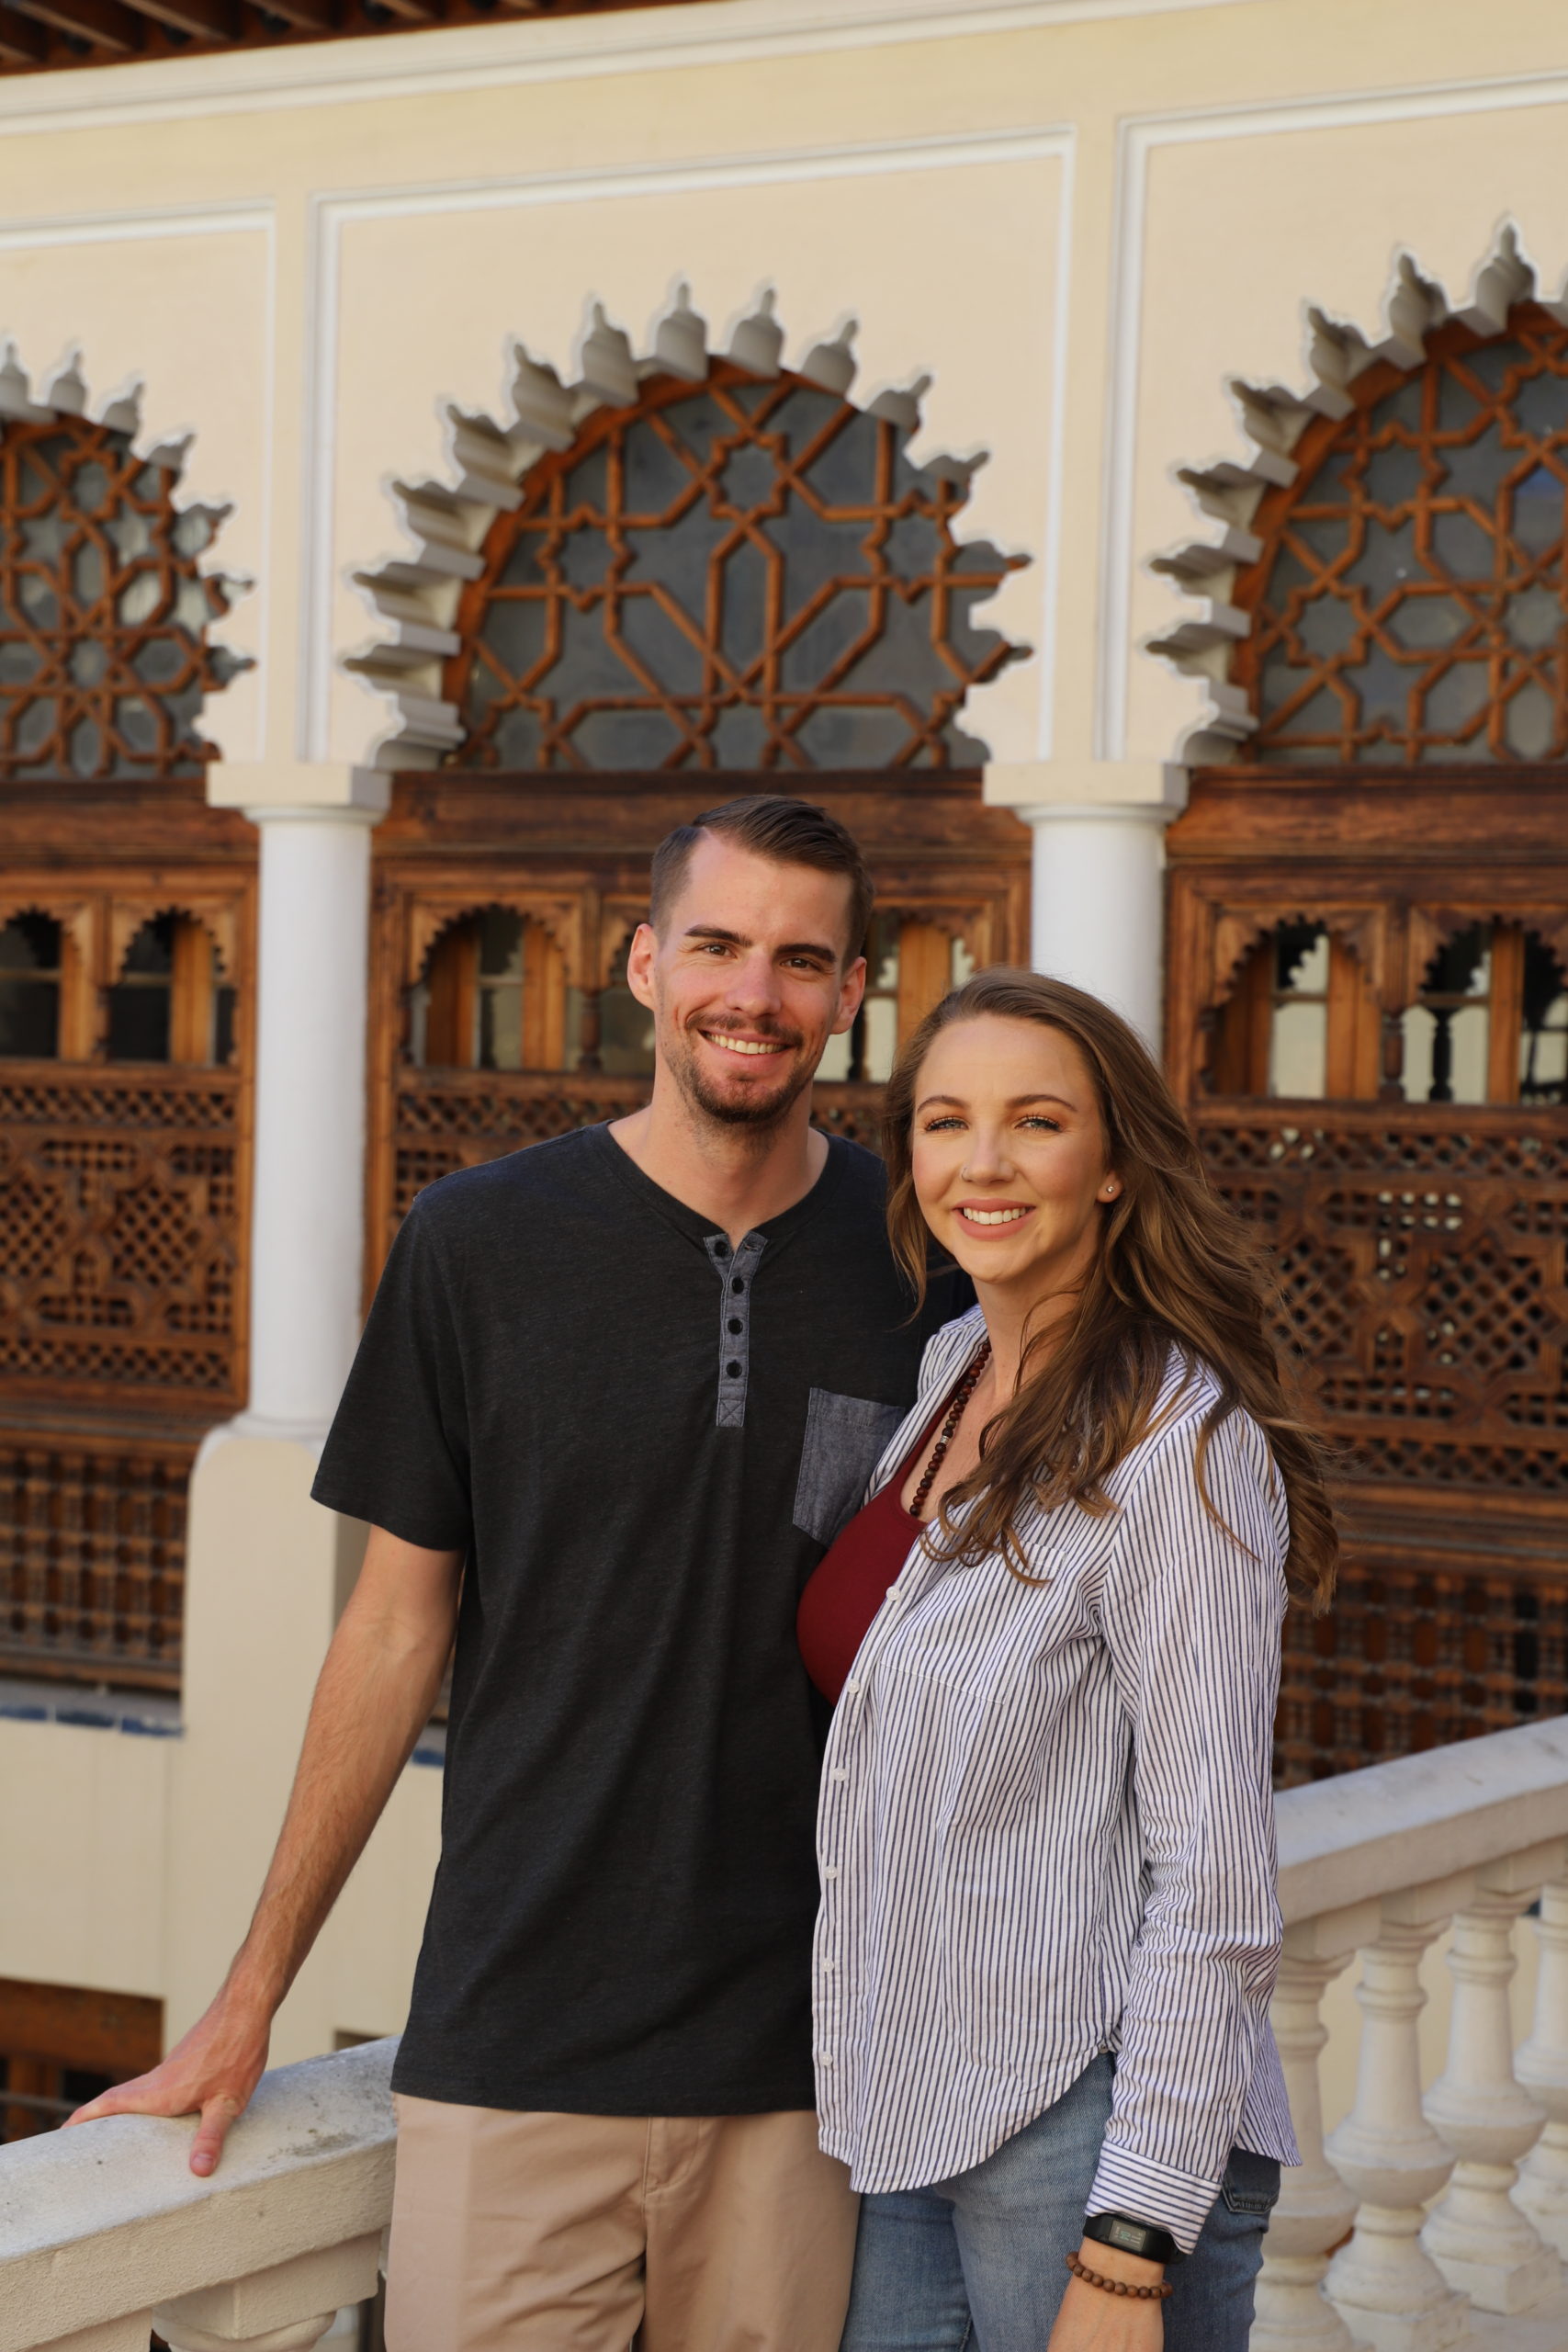 Image of authors Jacqueline and Dylan standing in a museum in Morocco.